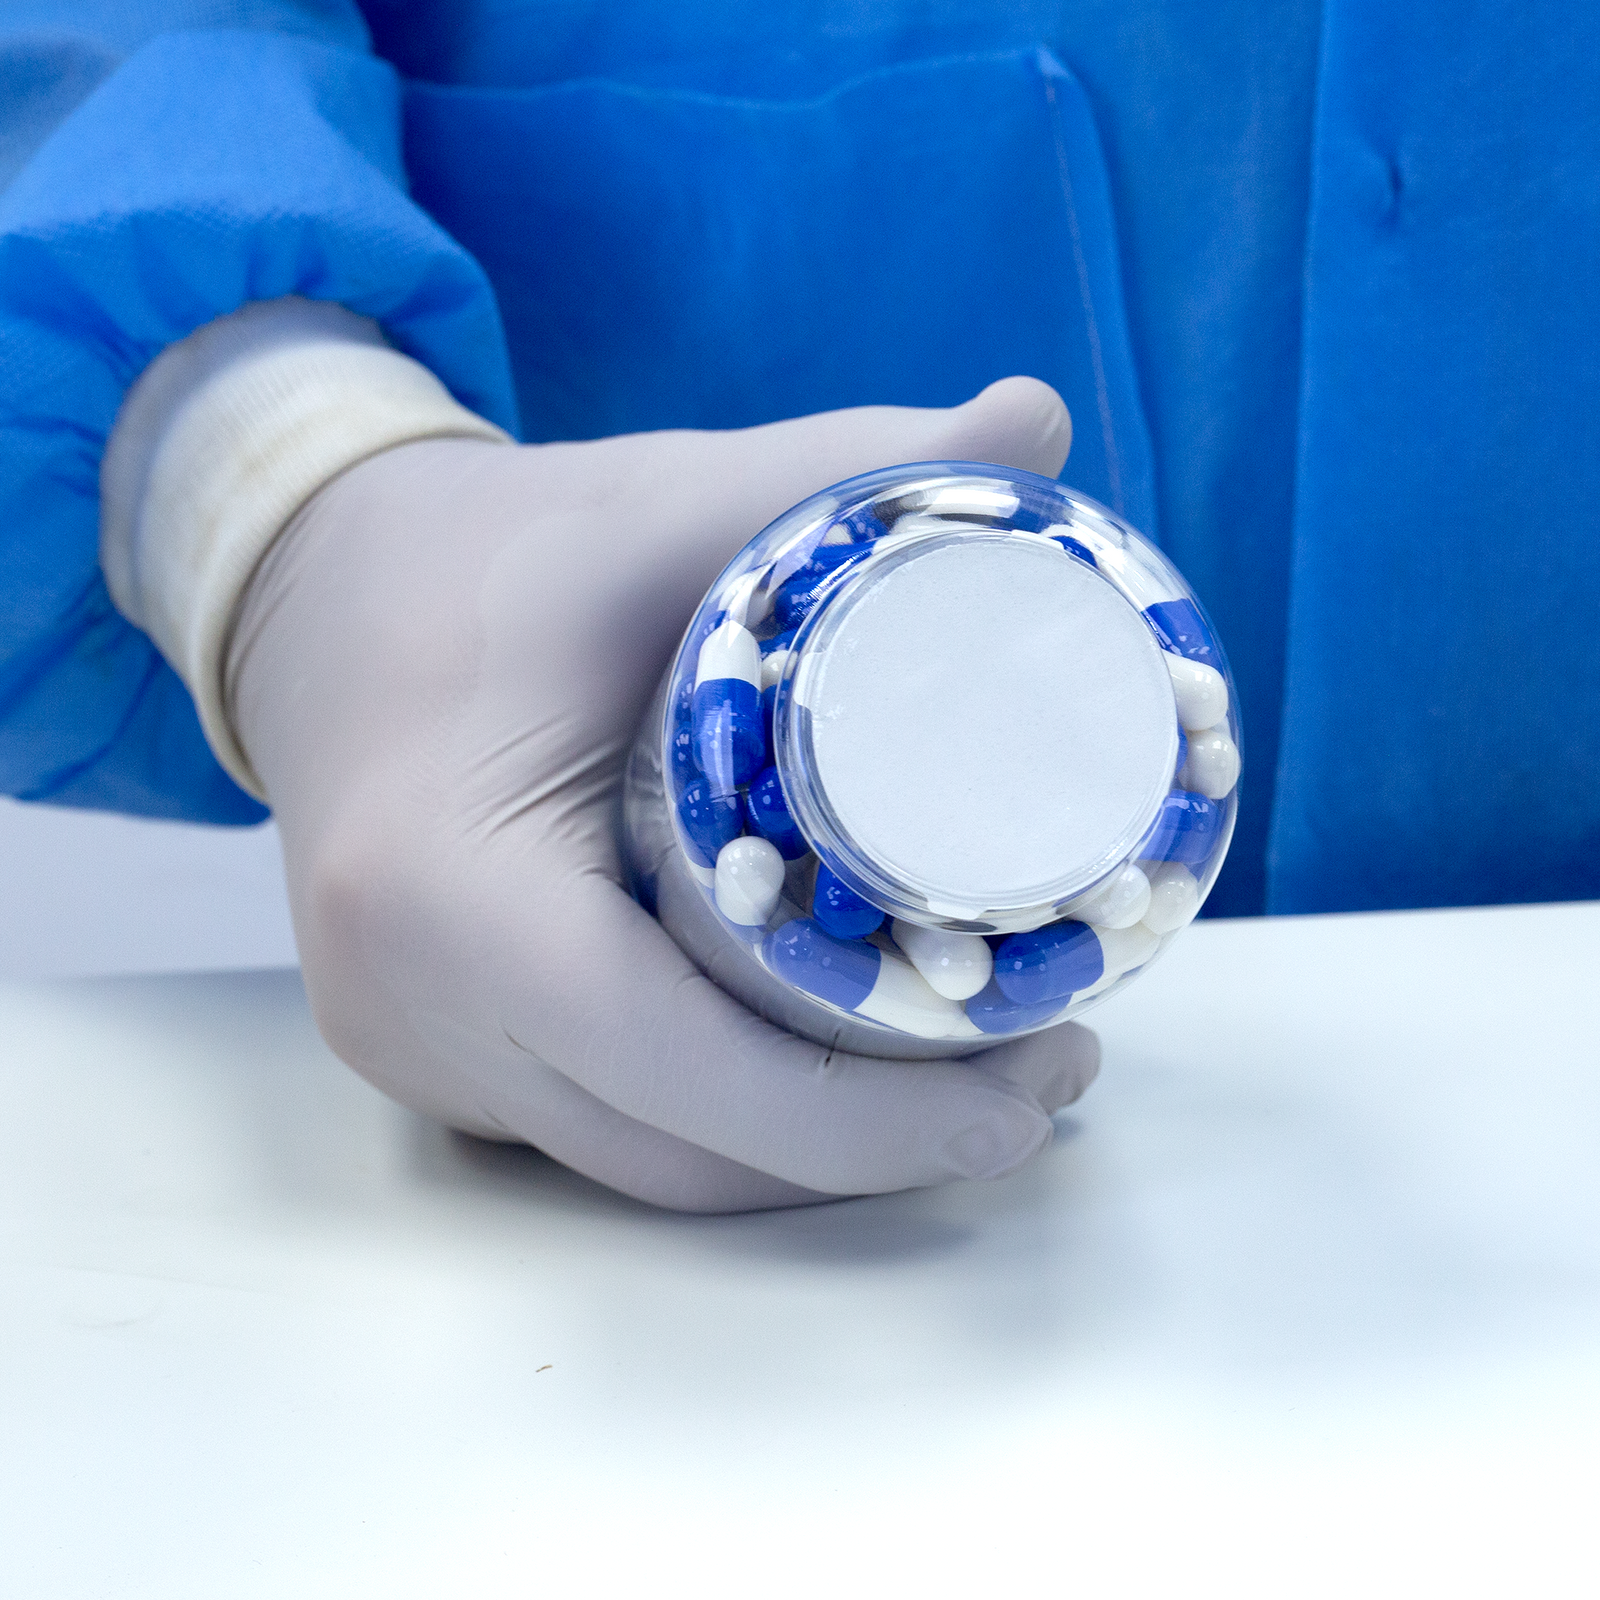 Person wearing nitrile gloves and holding a container closed with an induction liner with tabs. Container is filled with blue and white medicine tablets